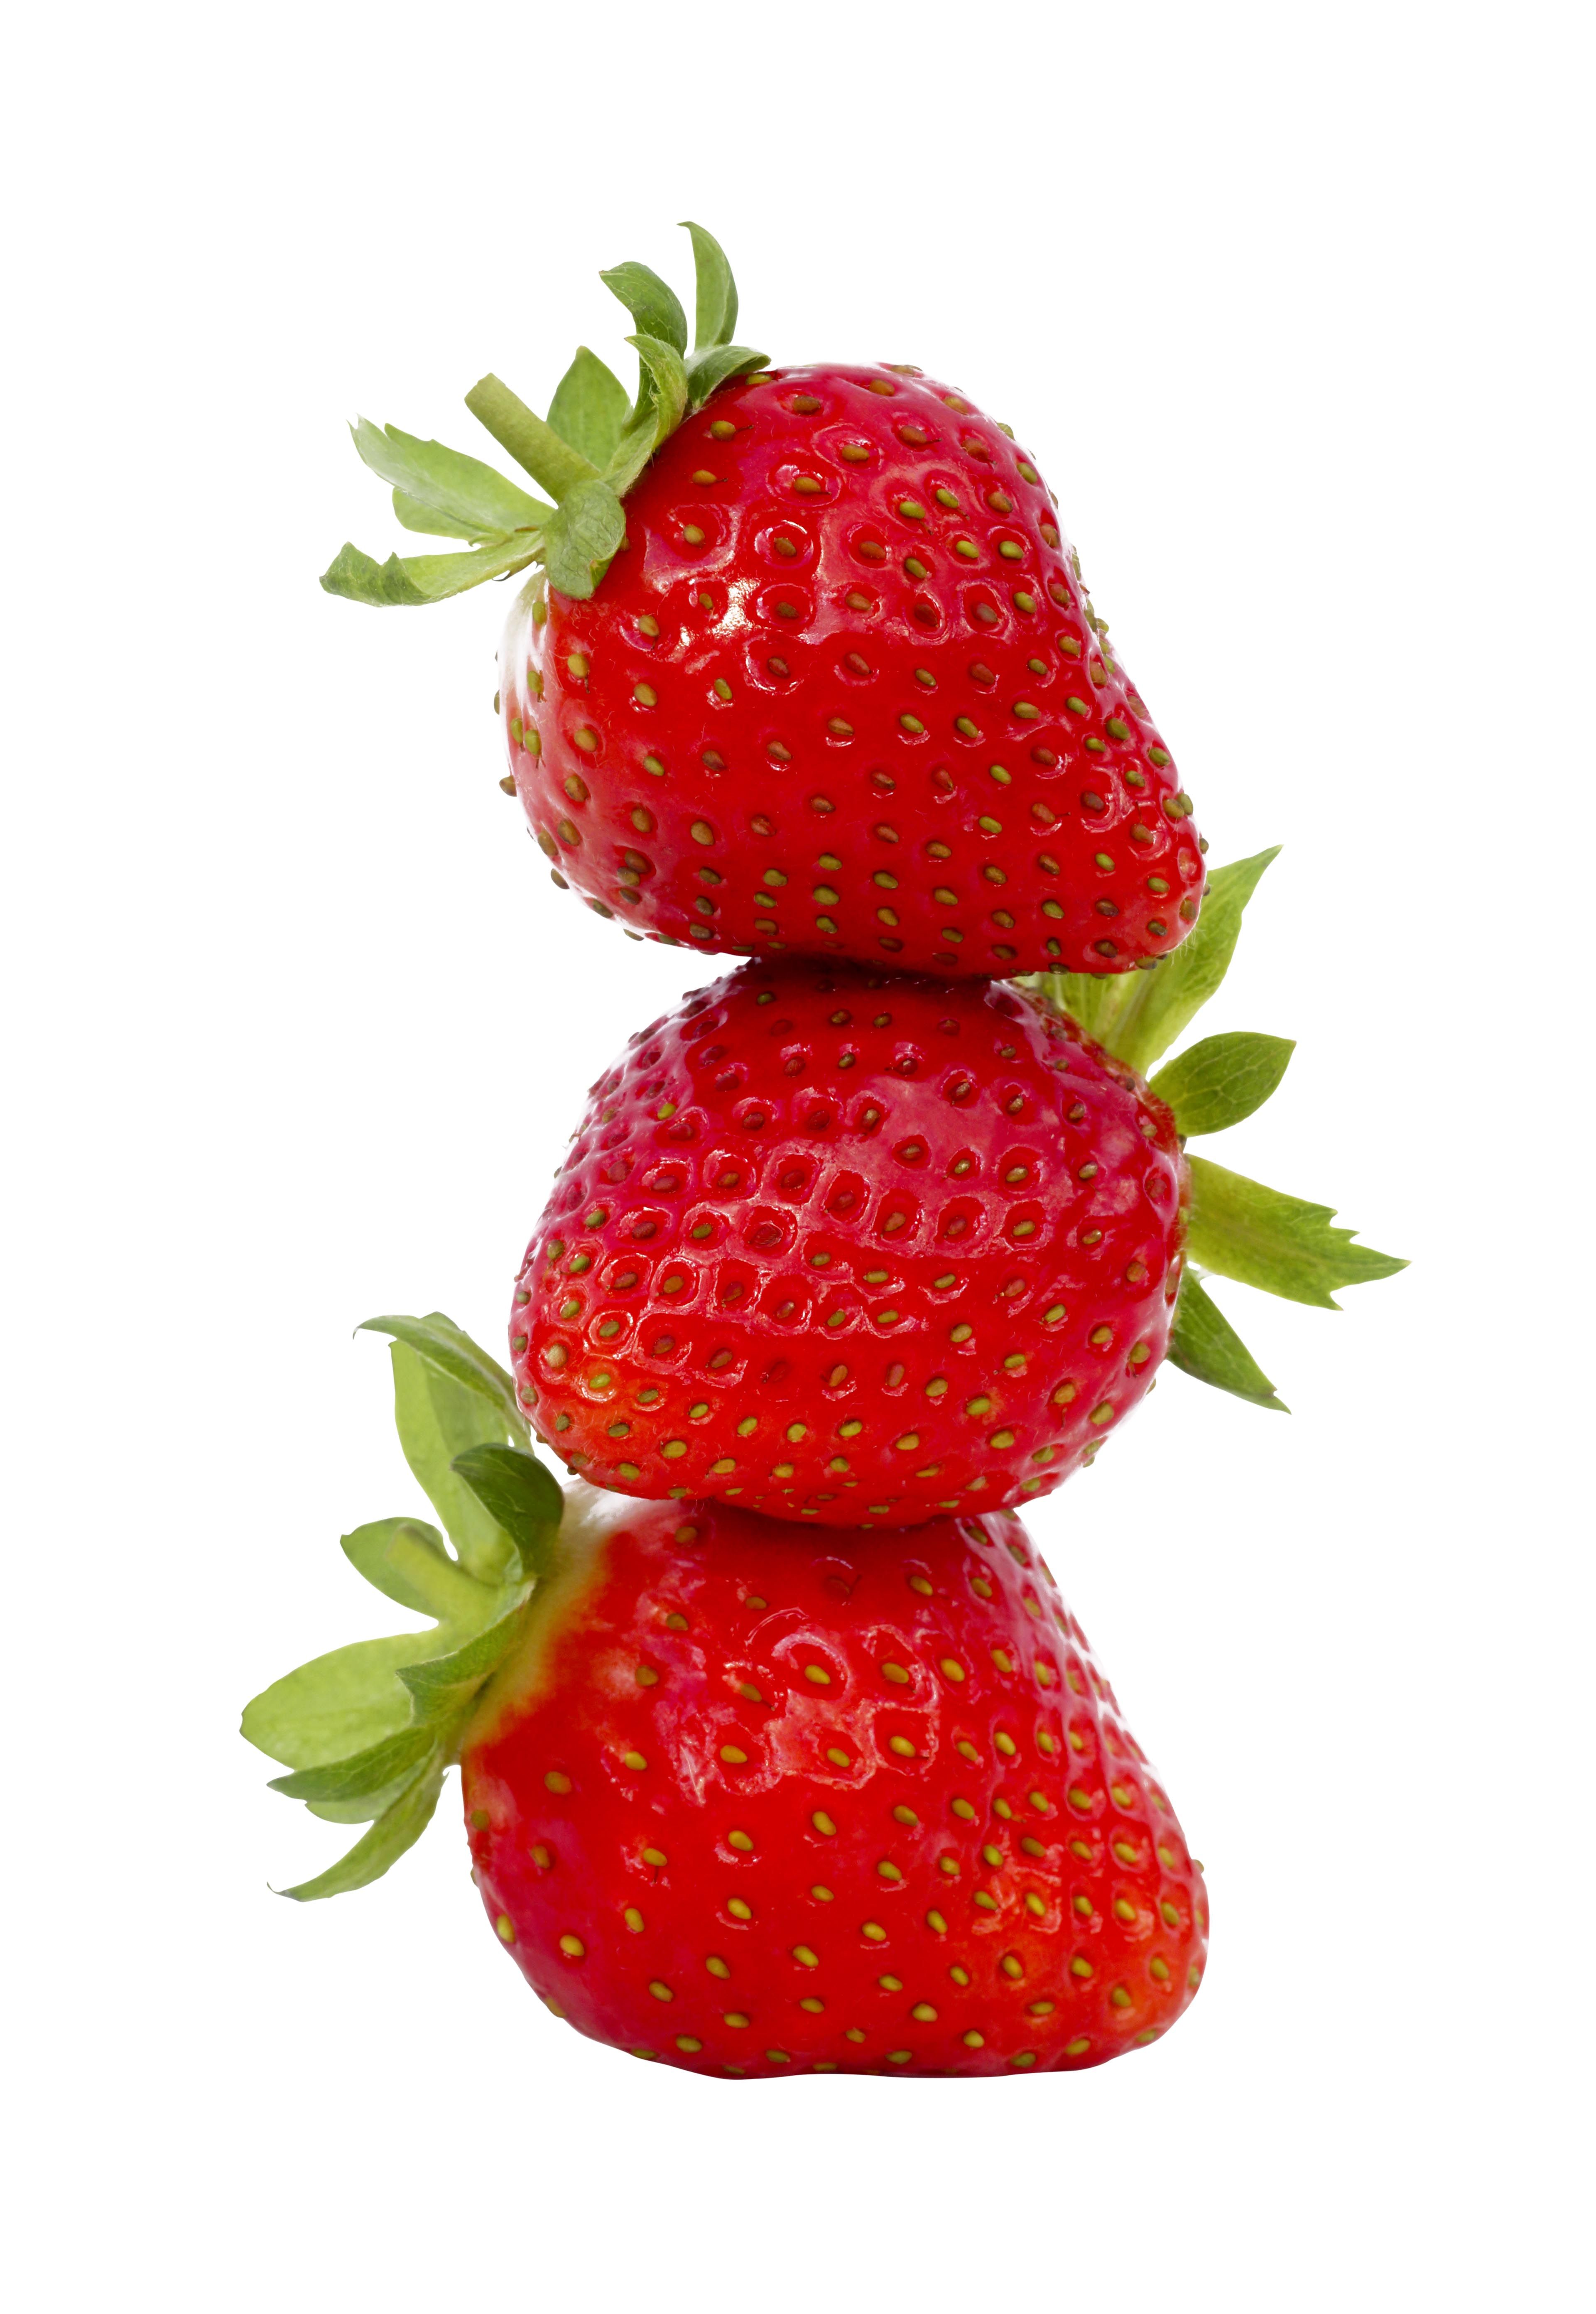 Three strawberries in a stack, on white background